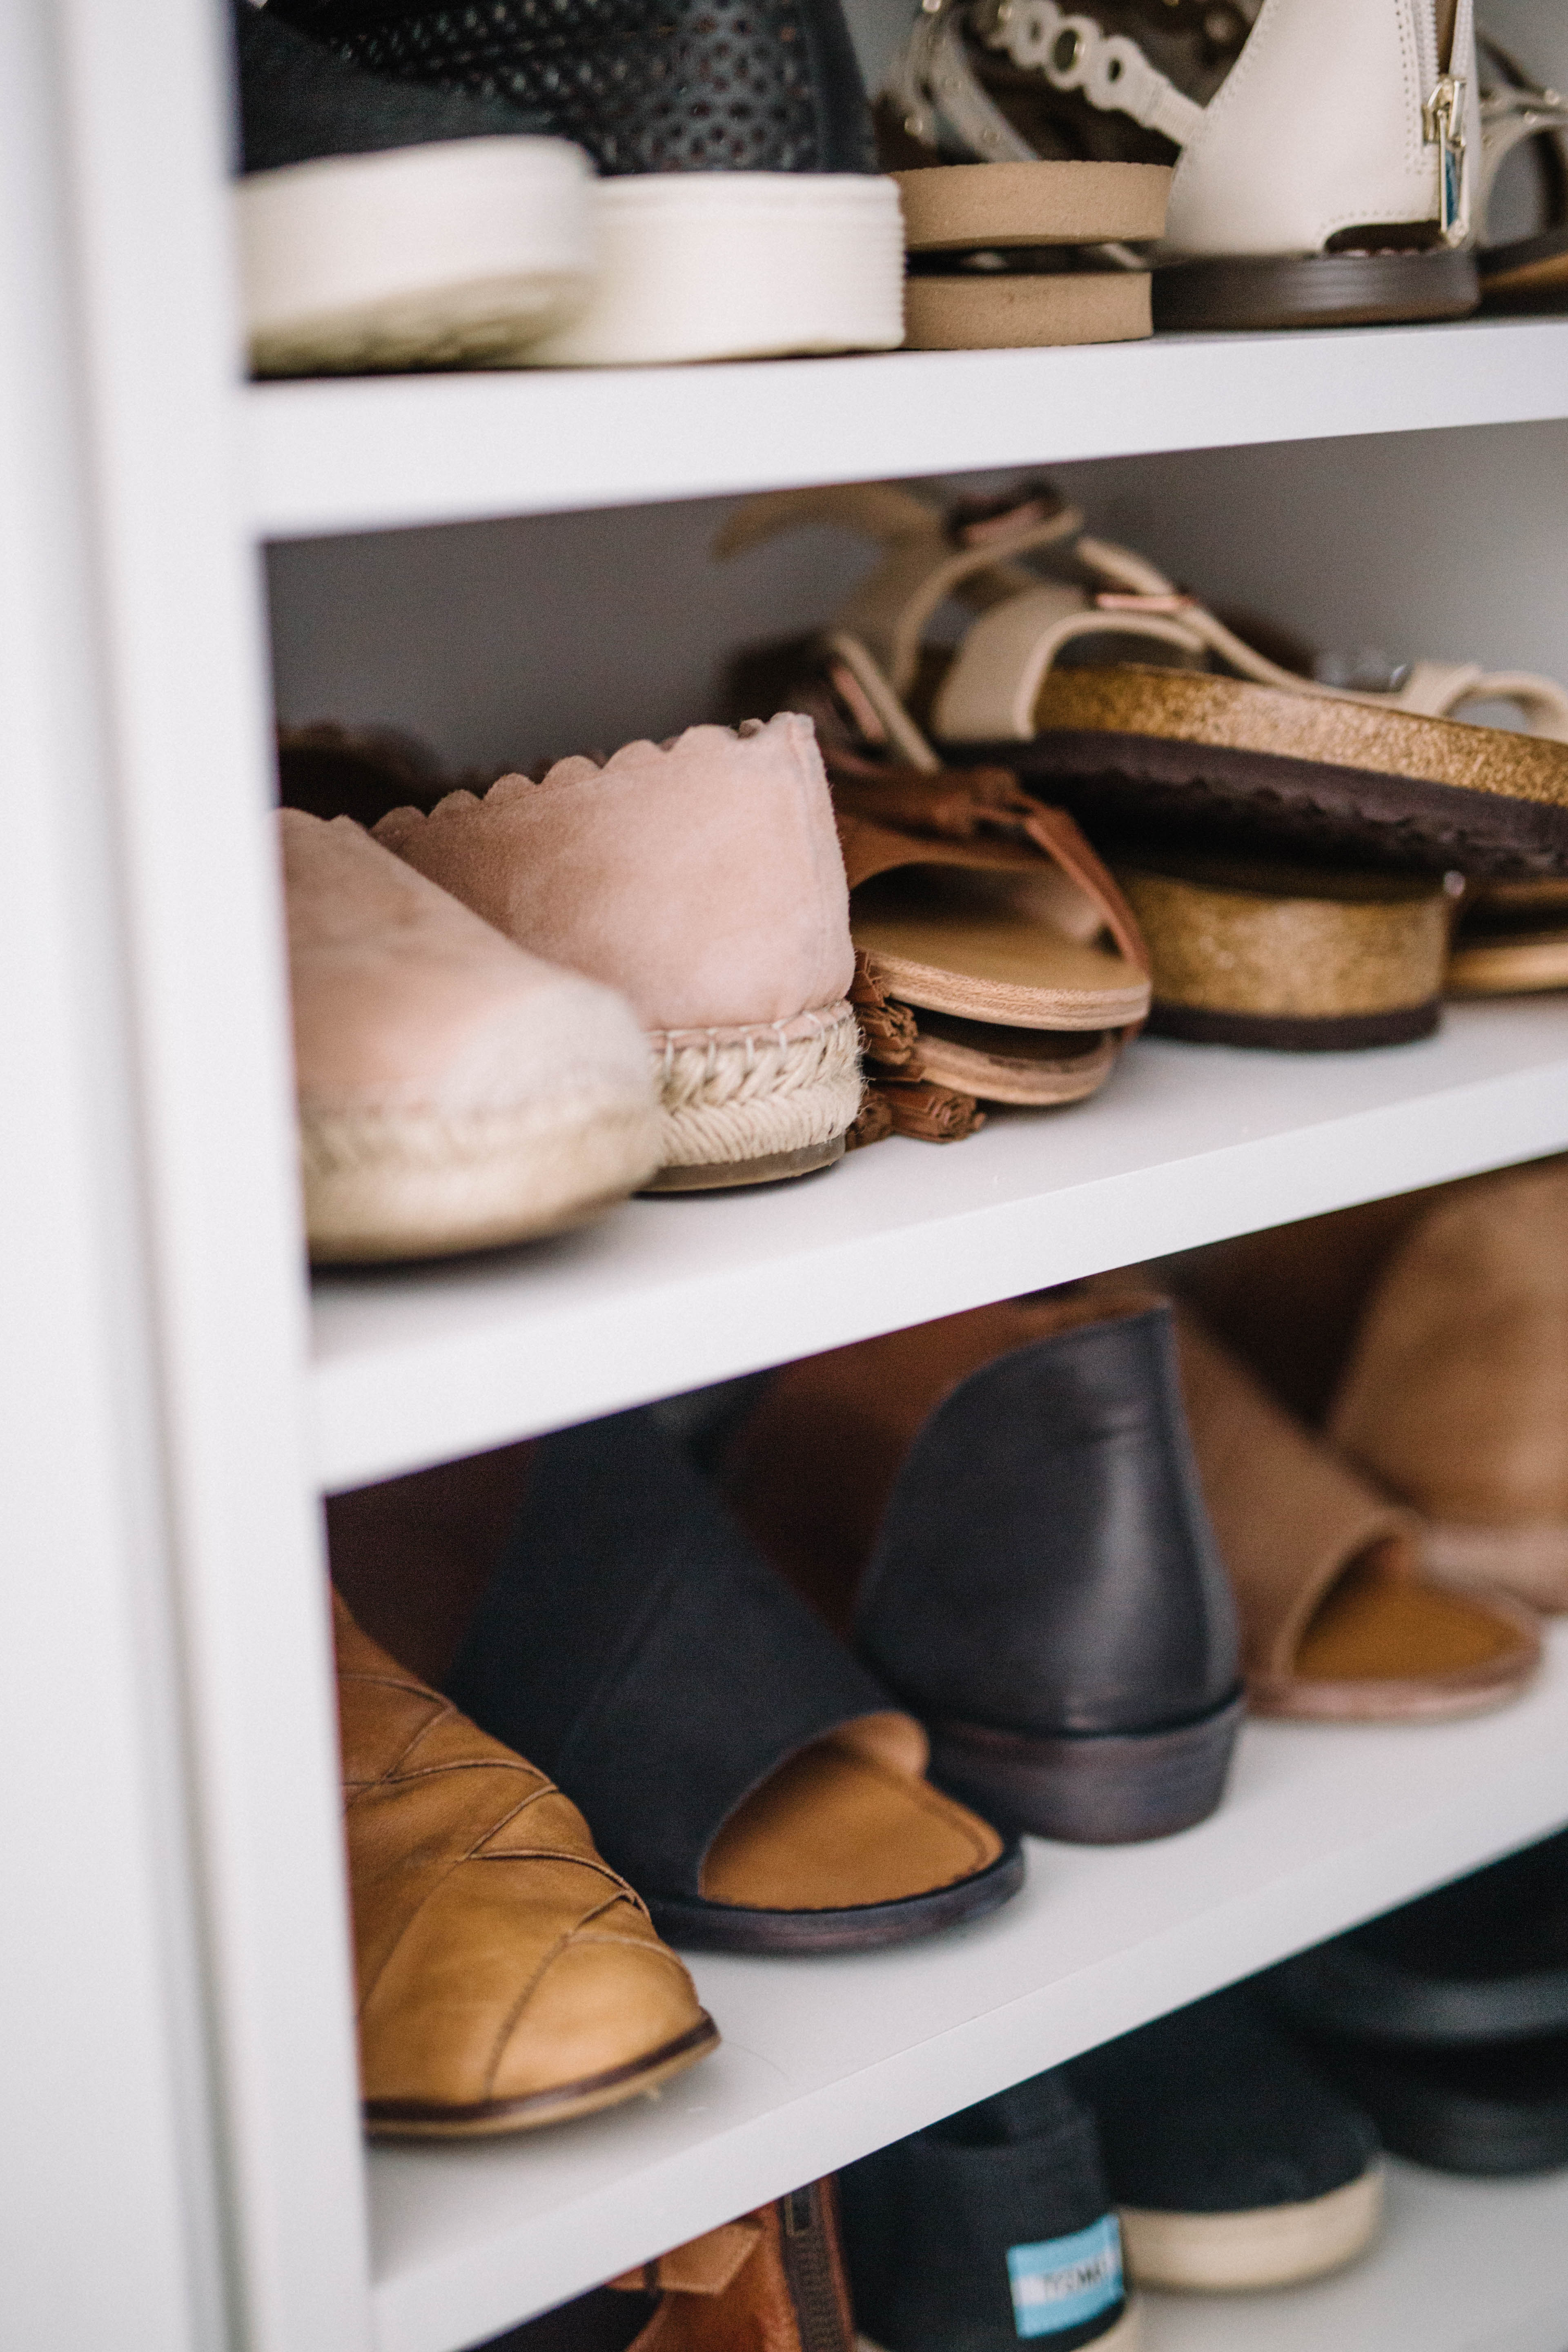 Our master walk-in closet makeover with built in drawers, a great area for shoes and more! 